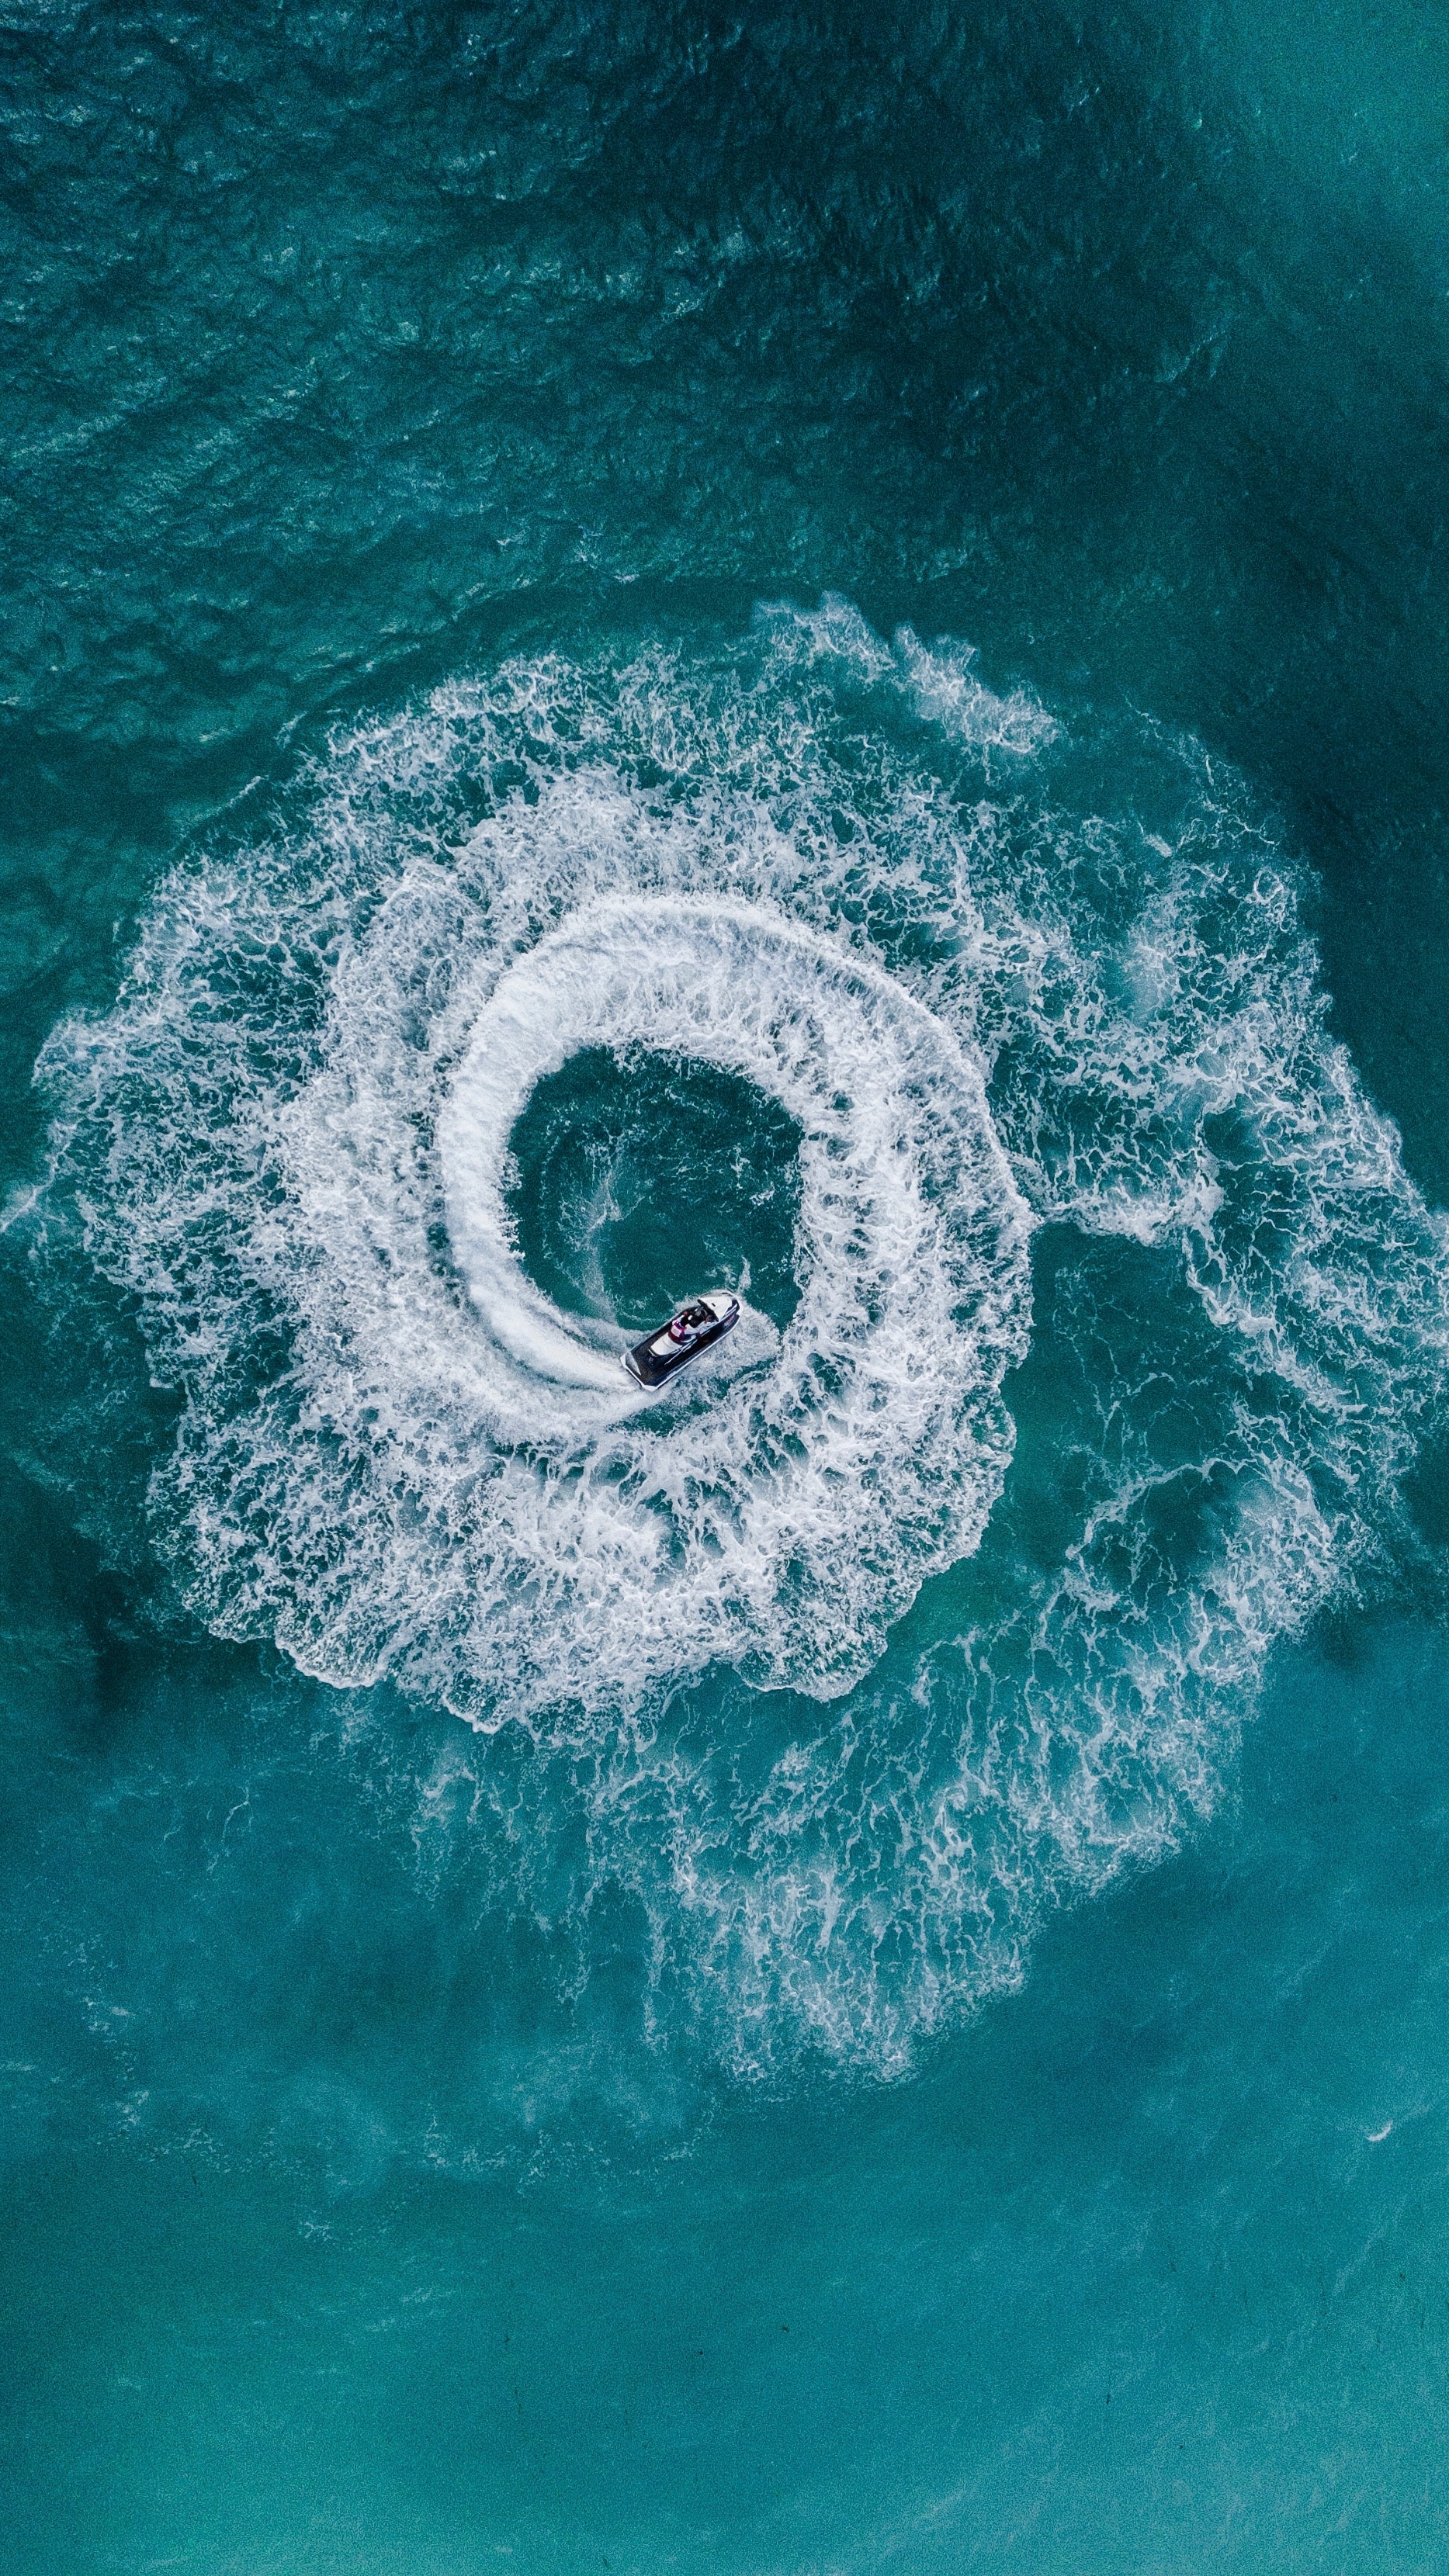 view from above, water, hydrocycle, miscellaneous, jet ski, waves, miscellanea, sea